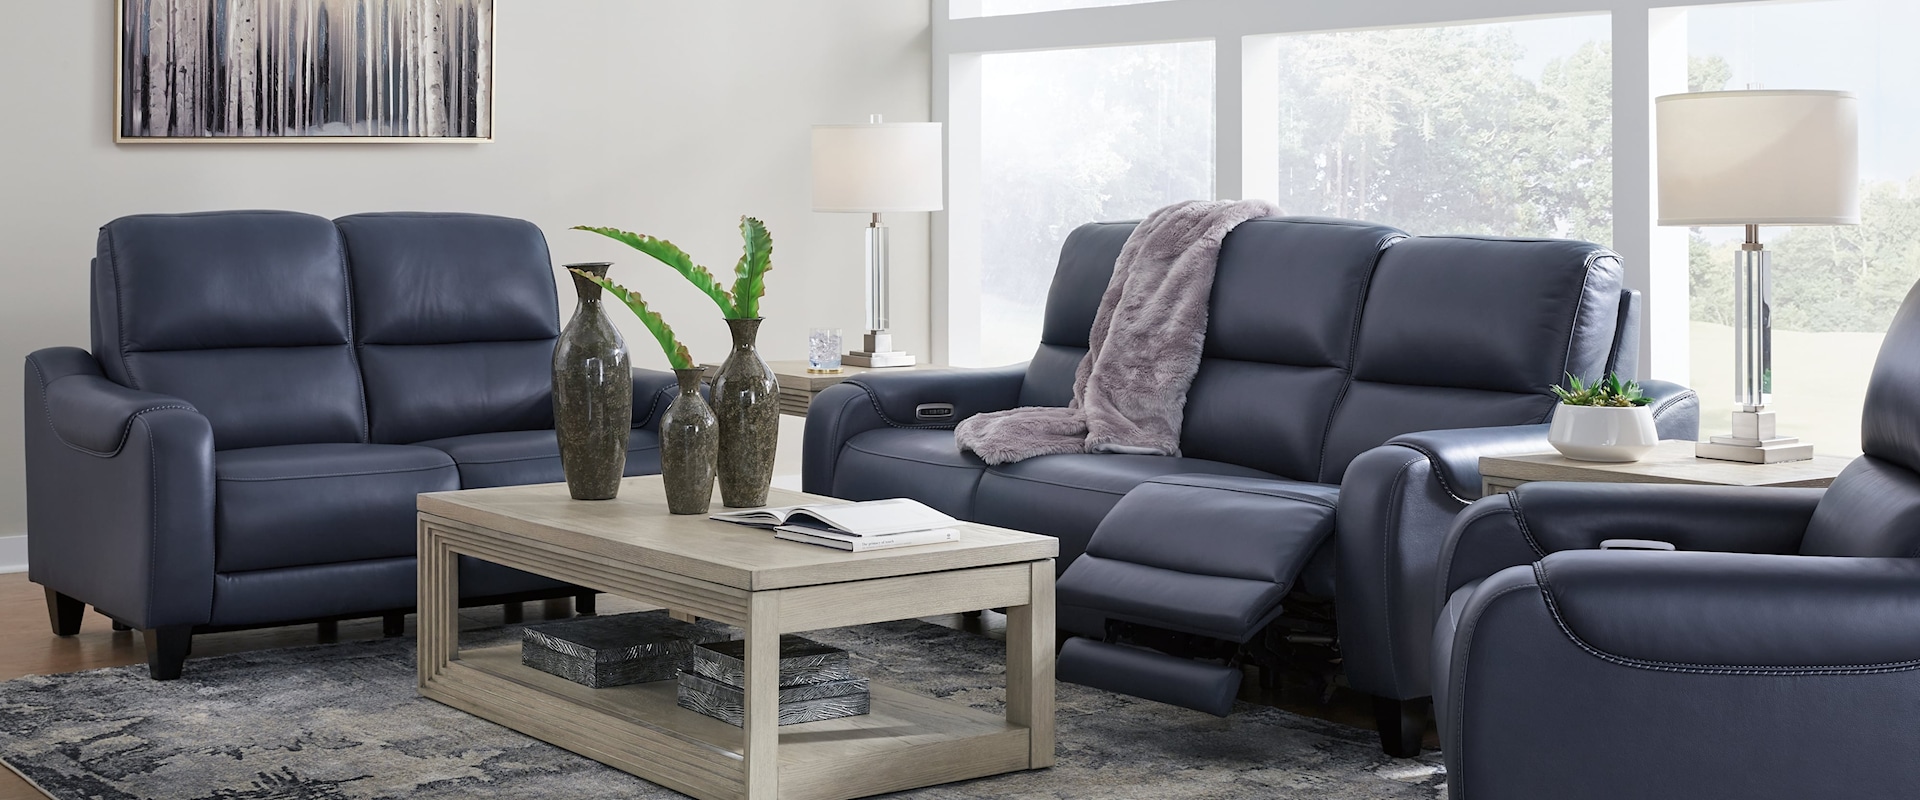 Power Reclining Sofa, Loveseat And Recliner